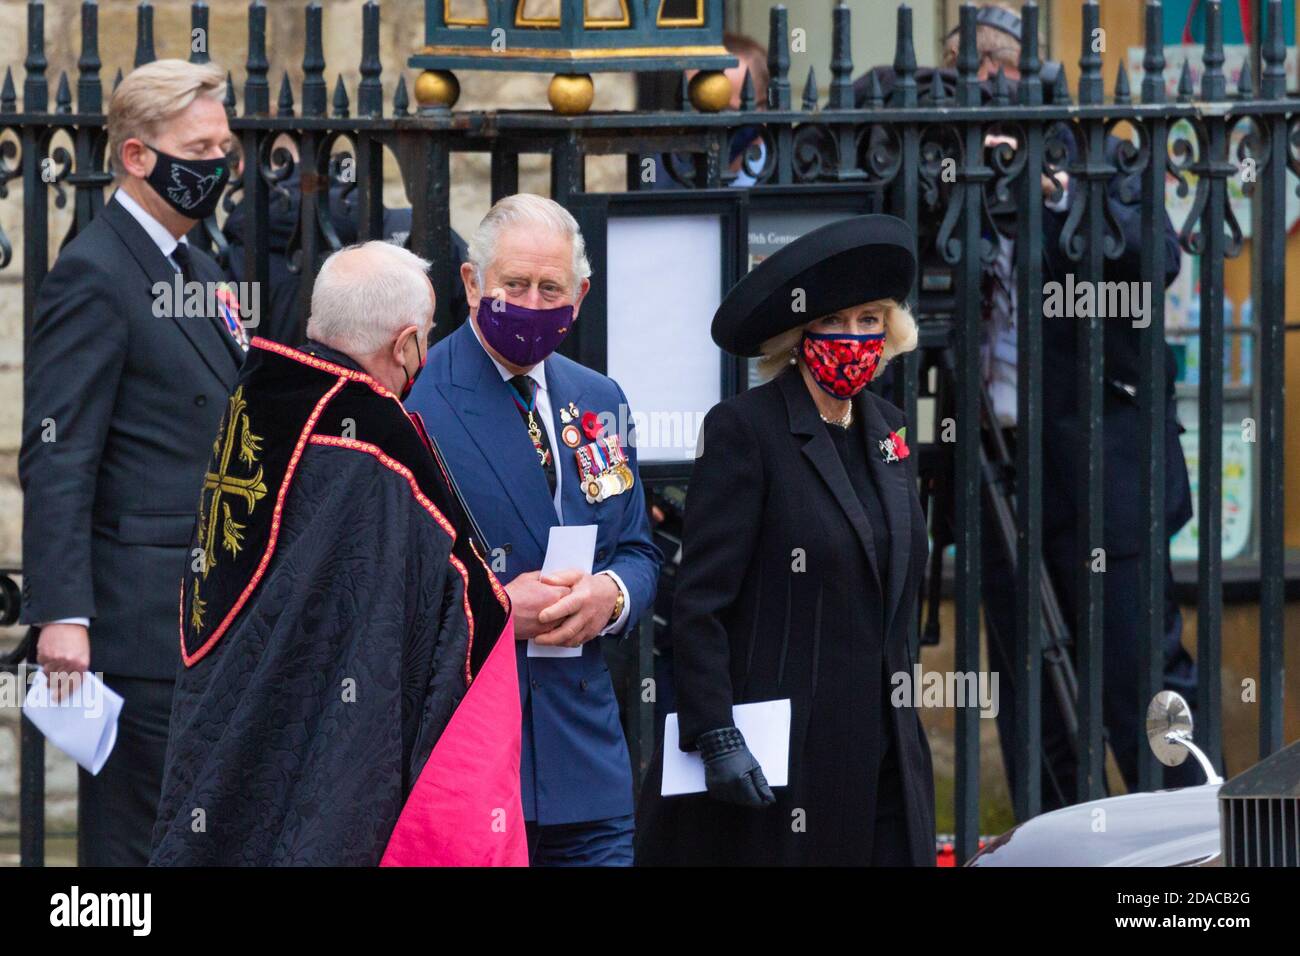 Royals HRH Prince Charles and Camilla Parker Bowles exit Westminster Abbey after the Remembrance day ceremony 11-11-2020 London, uk Stock Photo